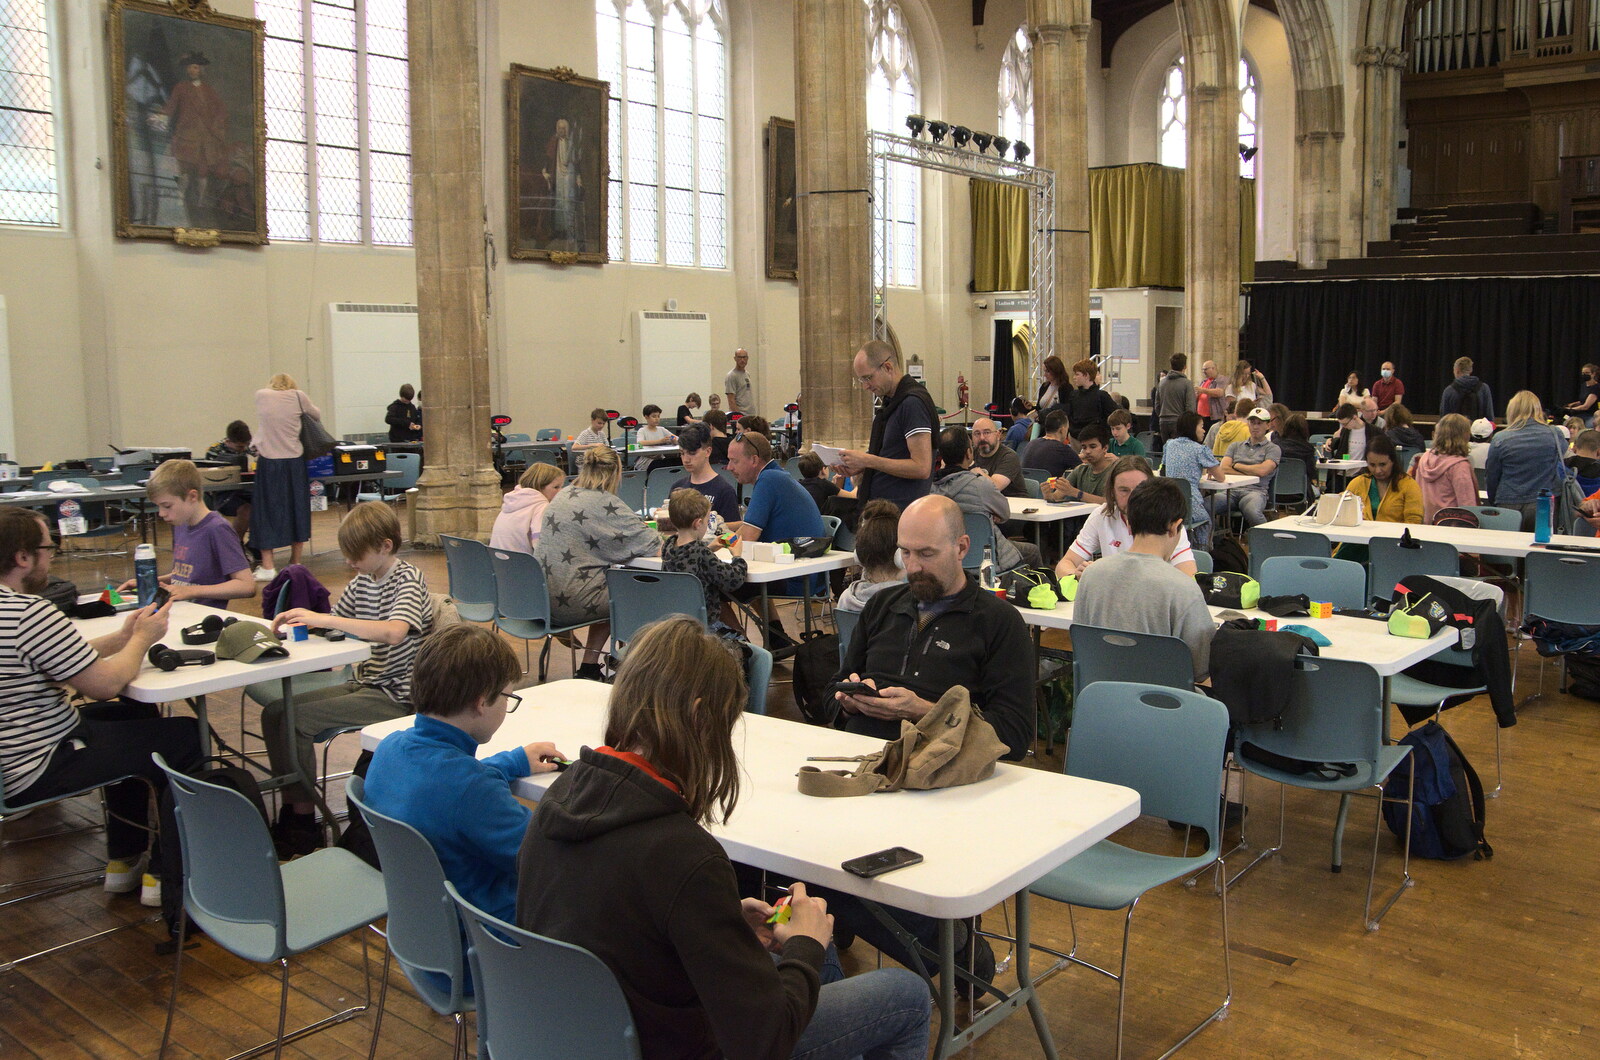 The World Cube Association Rubik's Competition, St. Andrew's Hall, Norwich - 31st July 2022: It's a proper nerd-fest in St. Andrew's